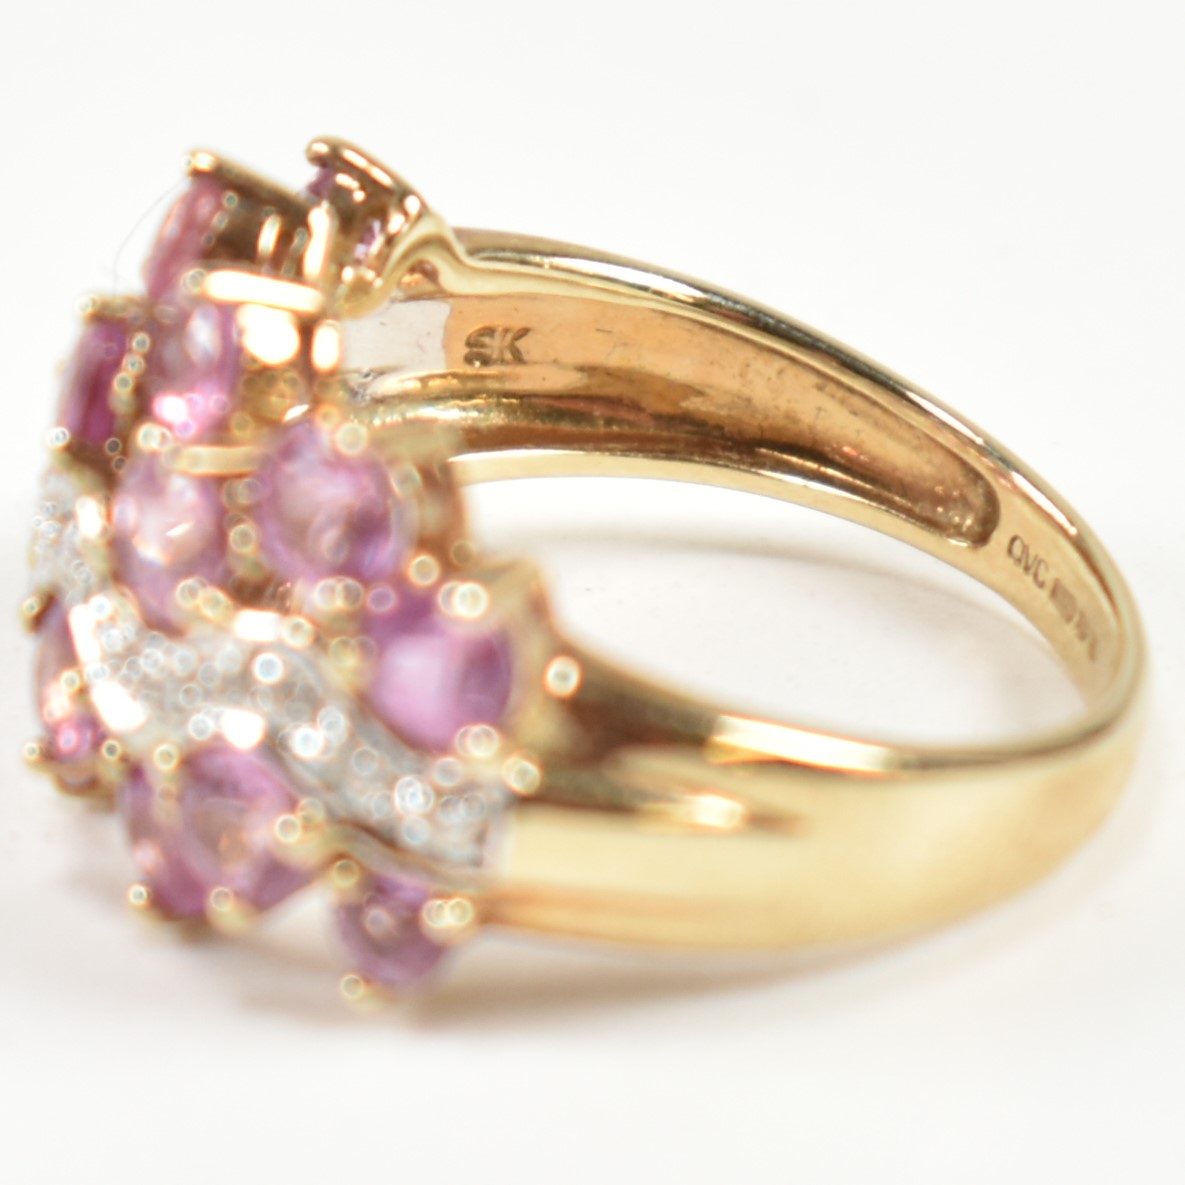 HALLMARKED 9CT GOLD PINK SAPPHIRE & DIAMOND CLUSTER RING - Image 7 of 9